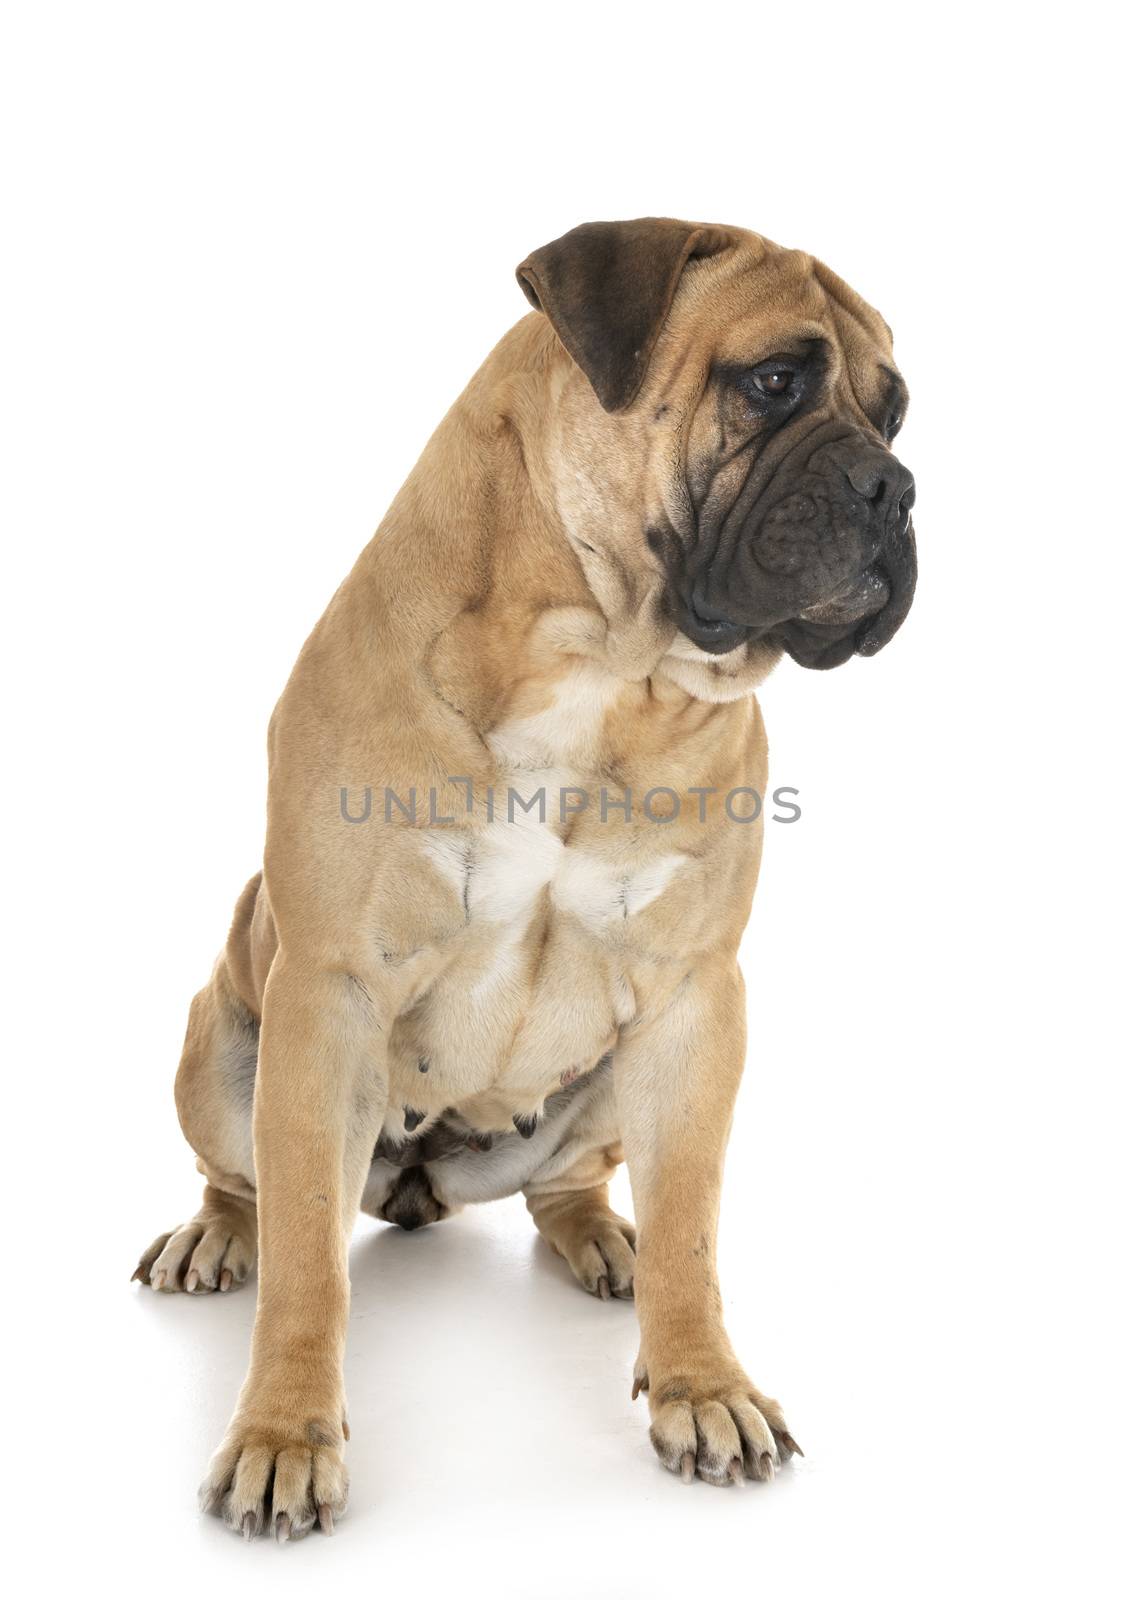 purebred bullmastif in front of white background